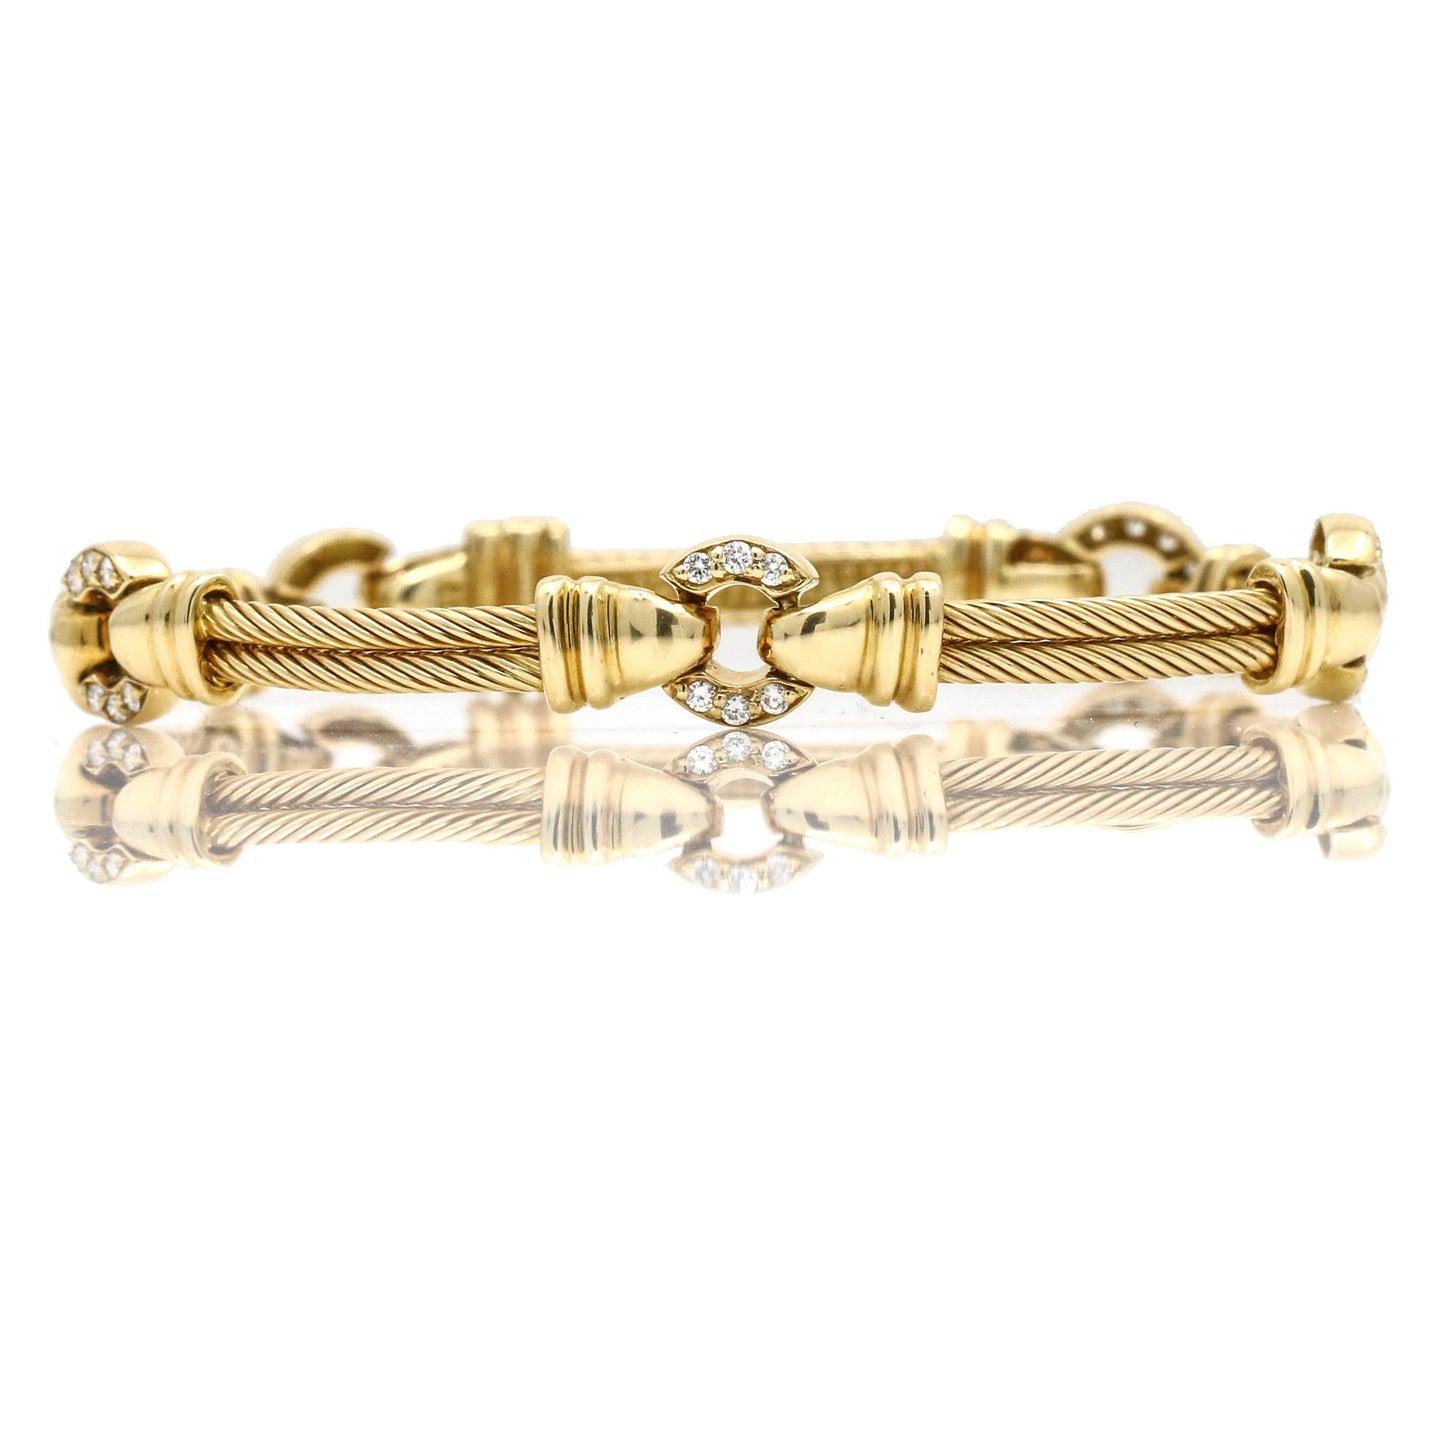 Philippe Charriol Diamond Cable Link Bracelet in 18k Yellow Gold - 31 Jewels Inc.